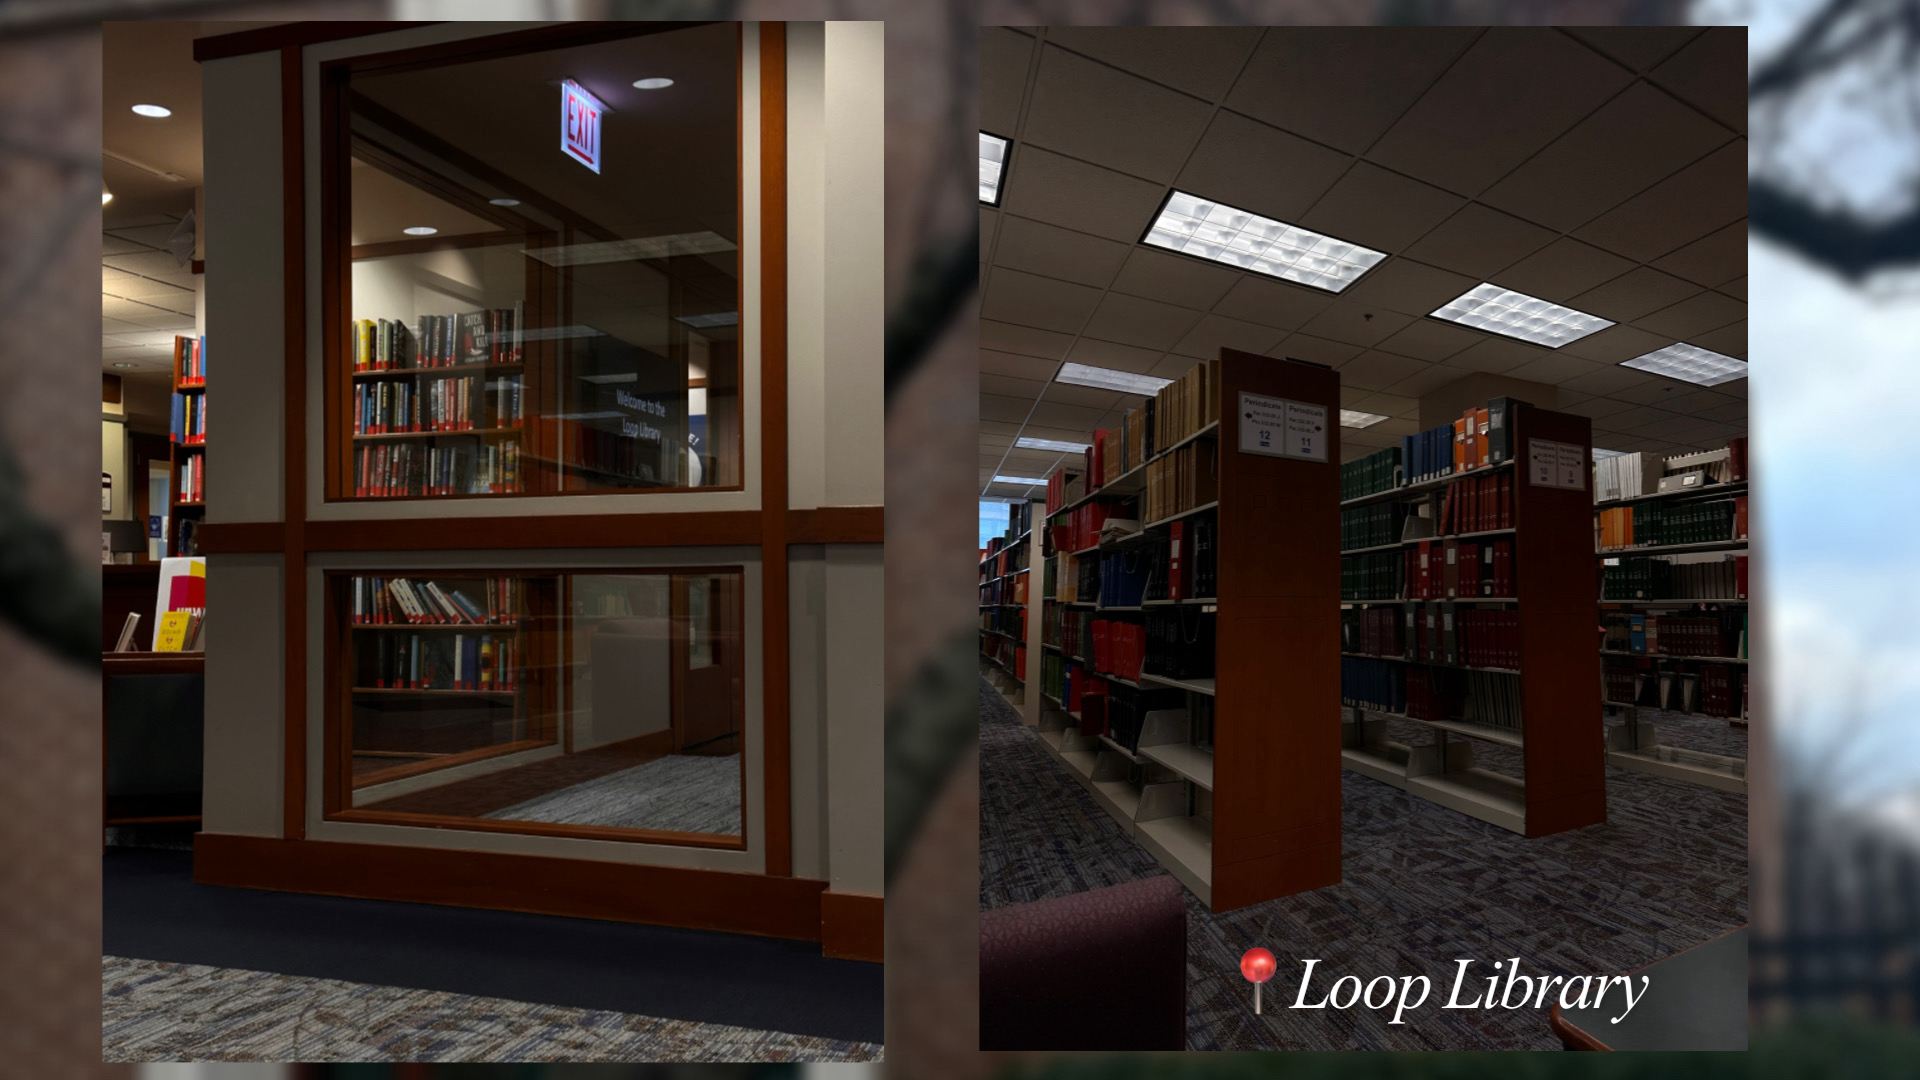 : Two images of a building’s interior (Library Loop)